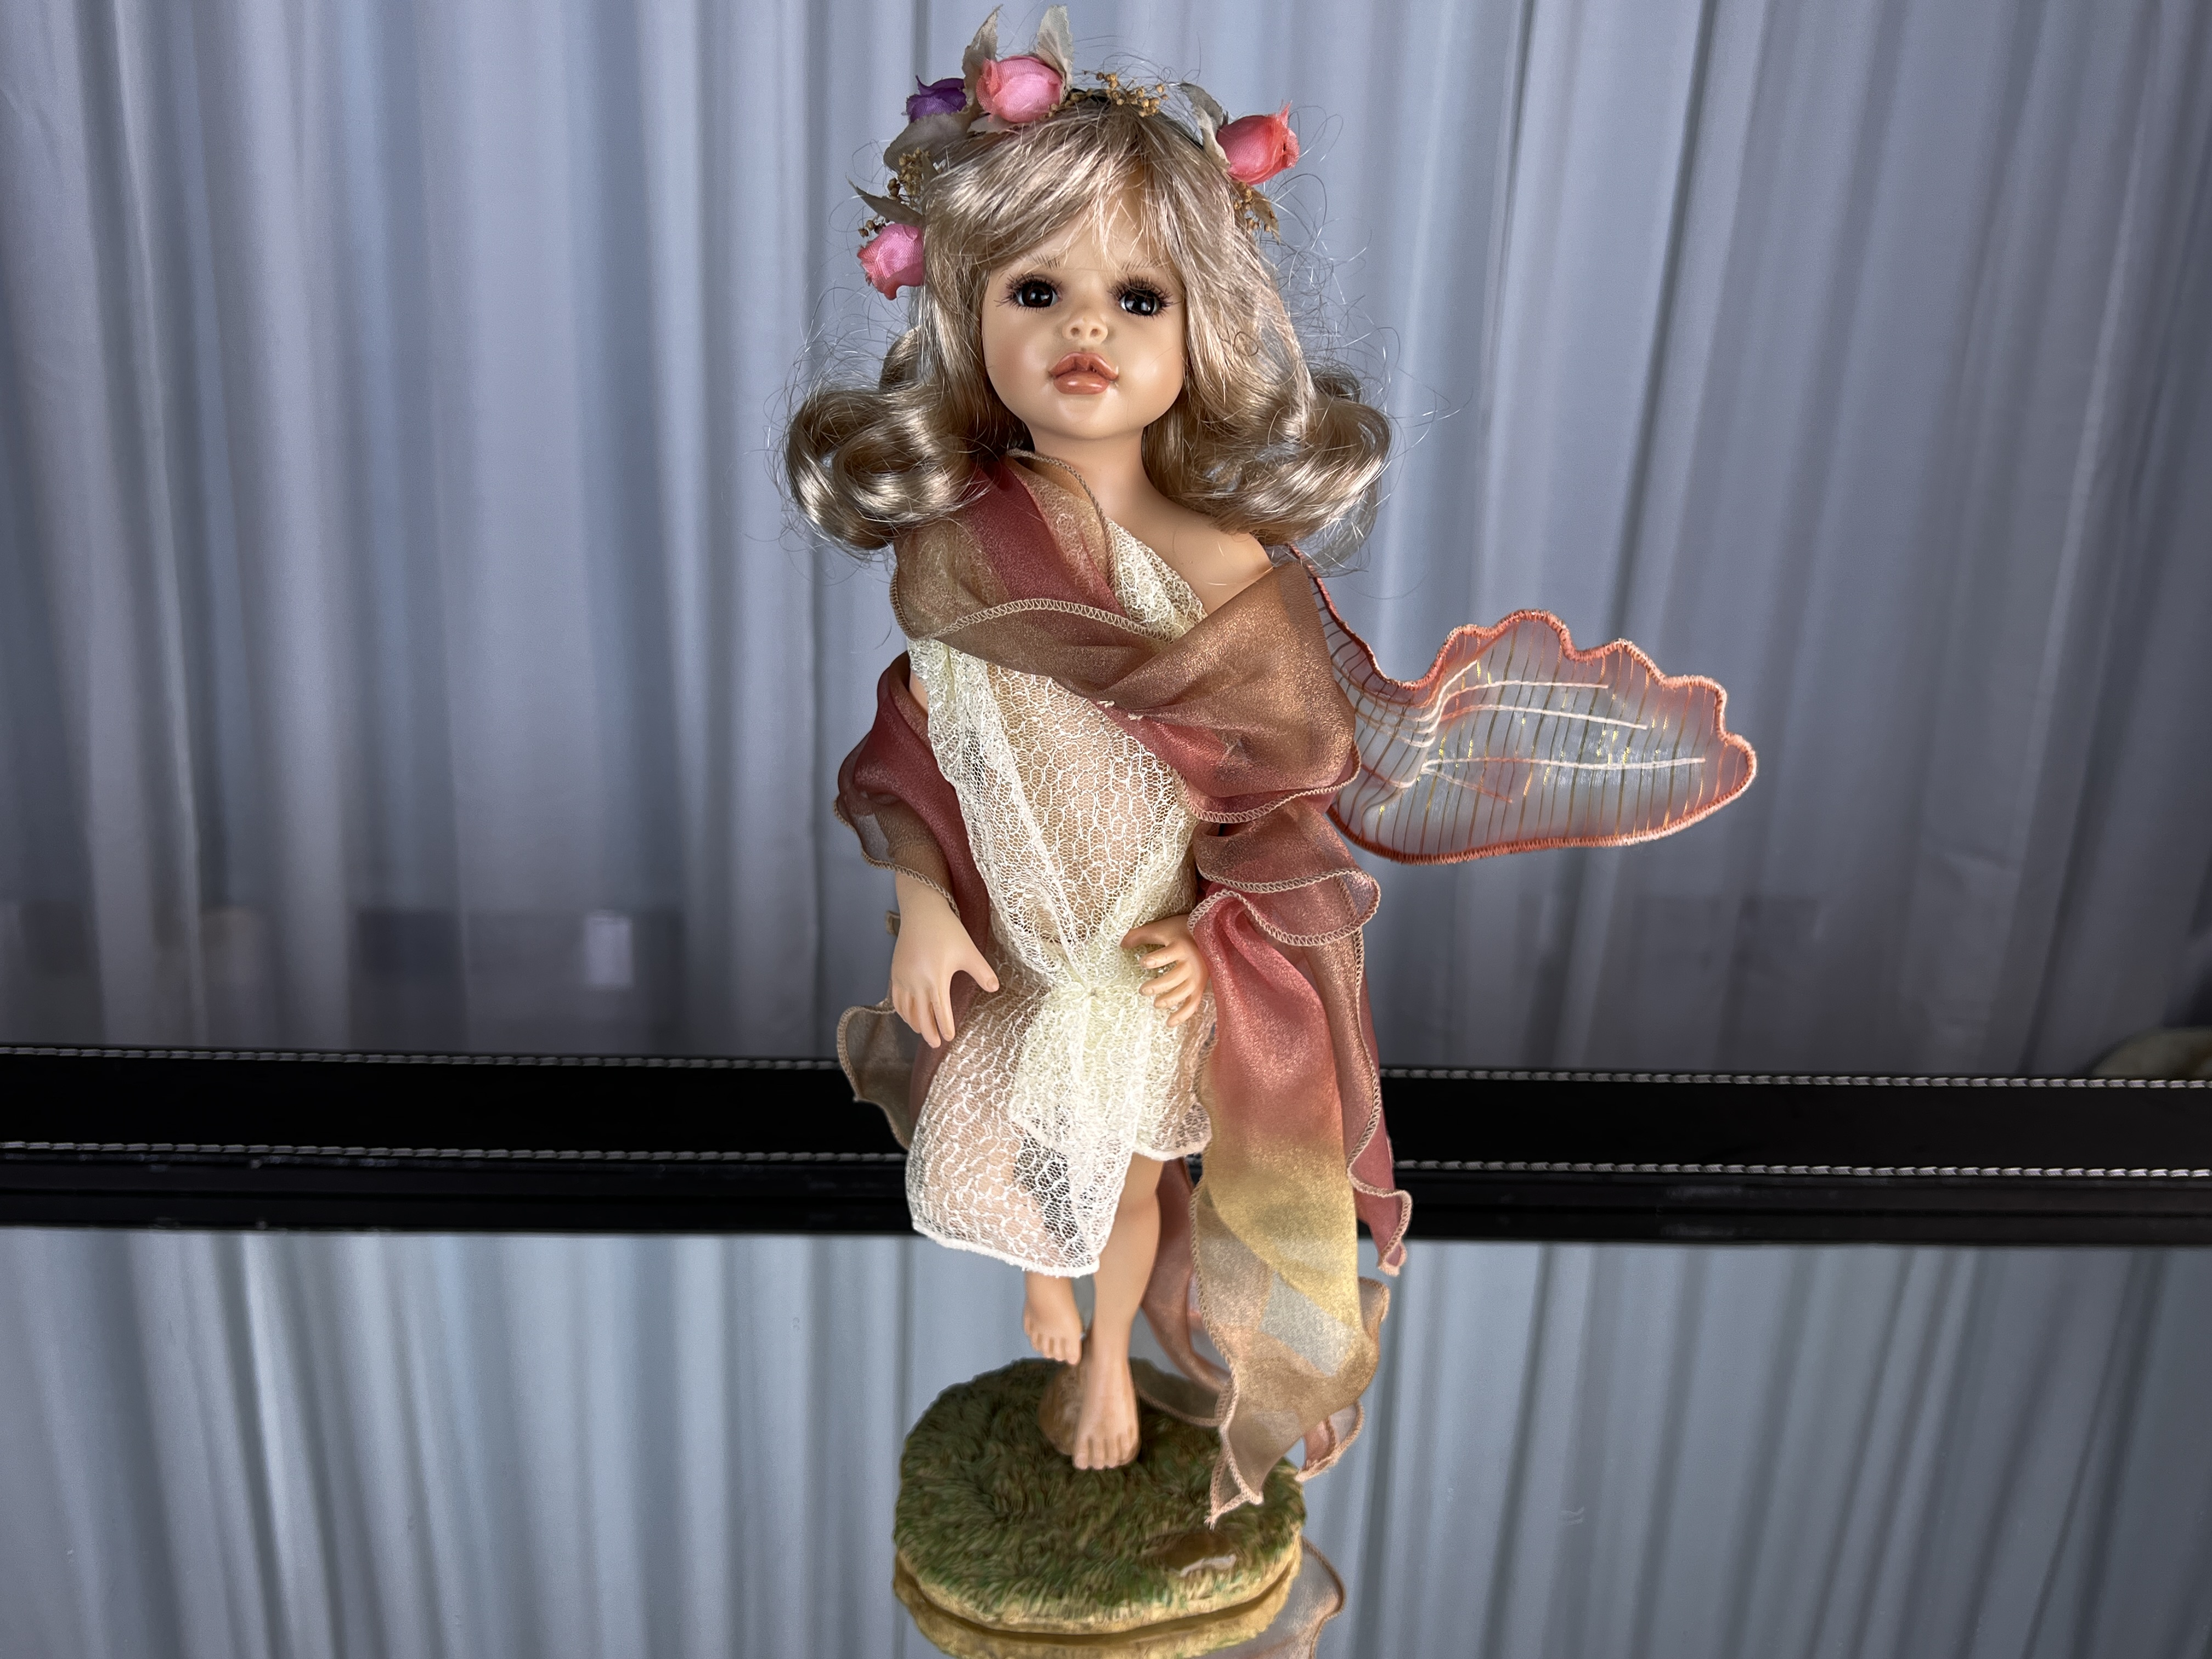 Oncrown Resin Puppe 41 cm. Top Zustand 